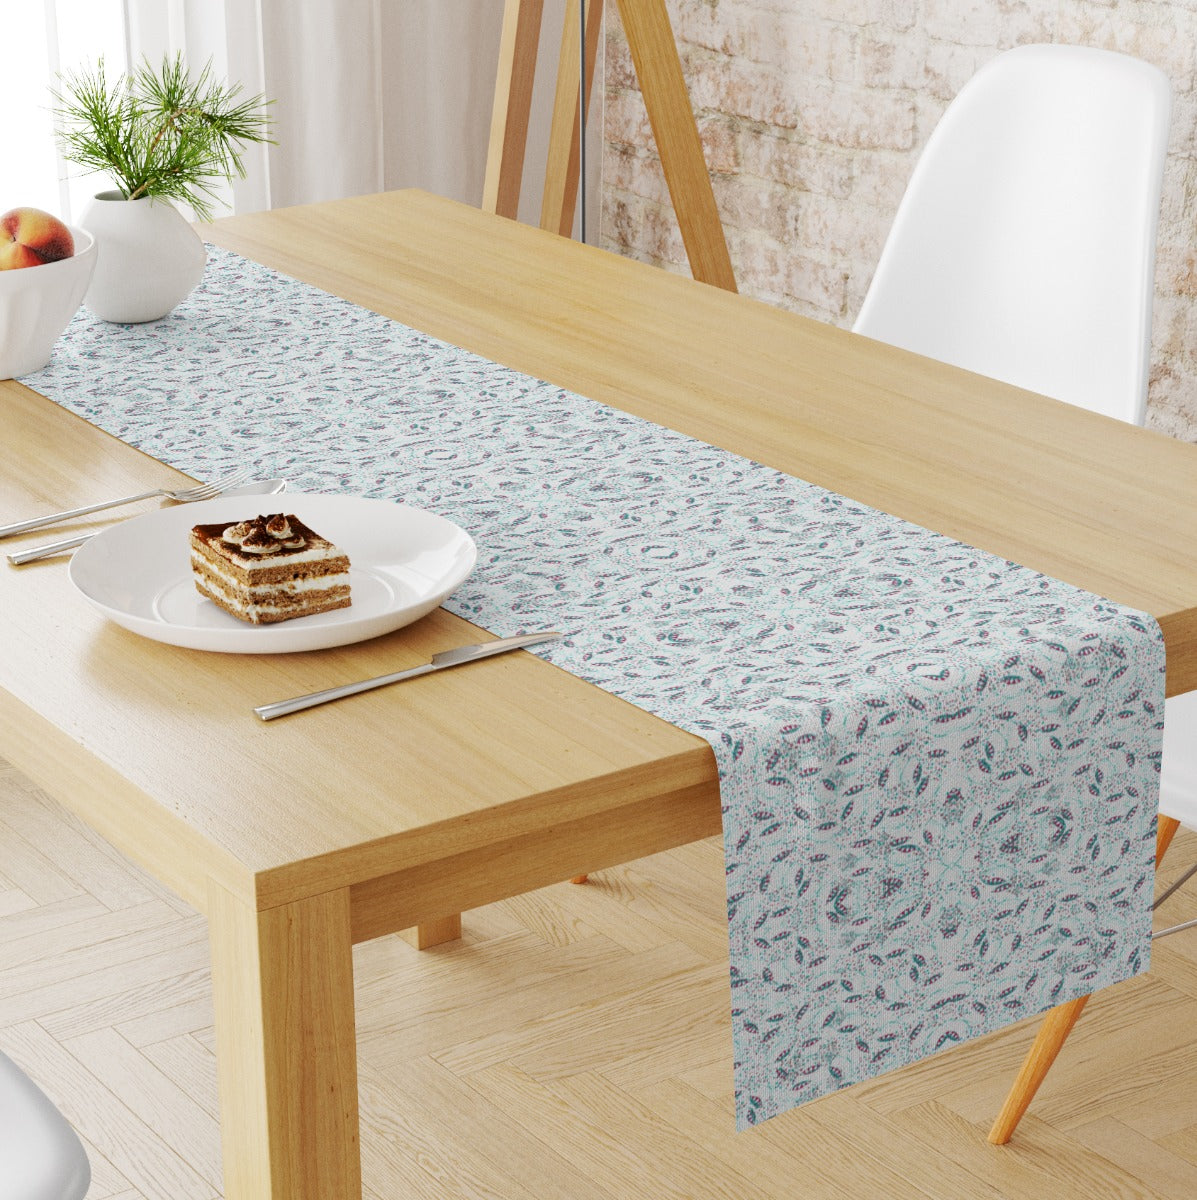 Connecting Lines Table Runner